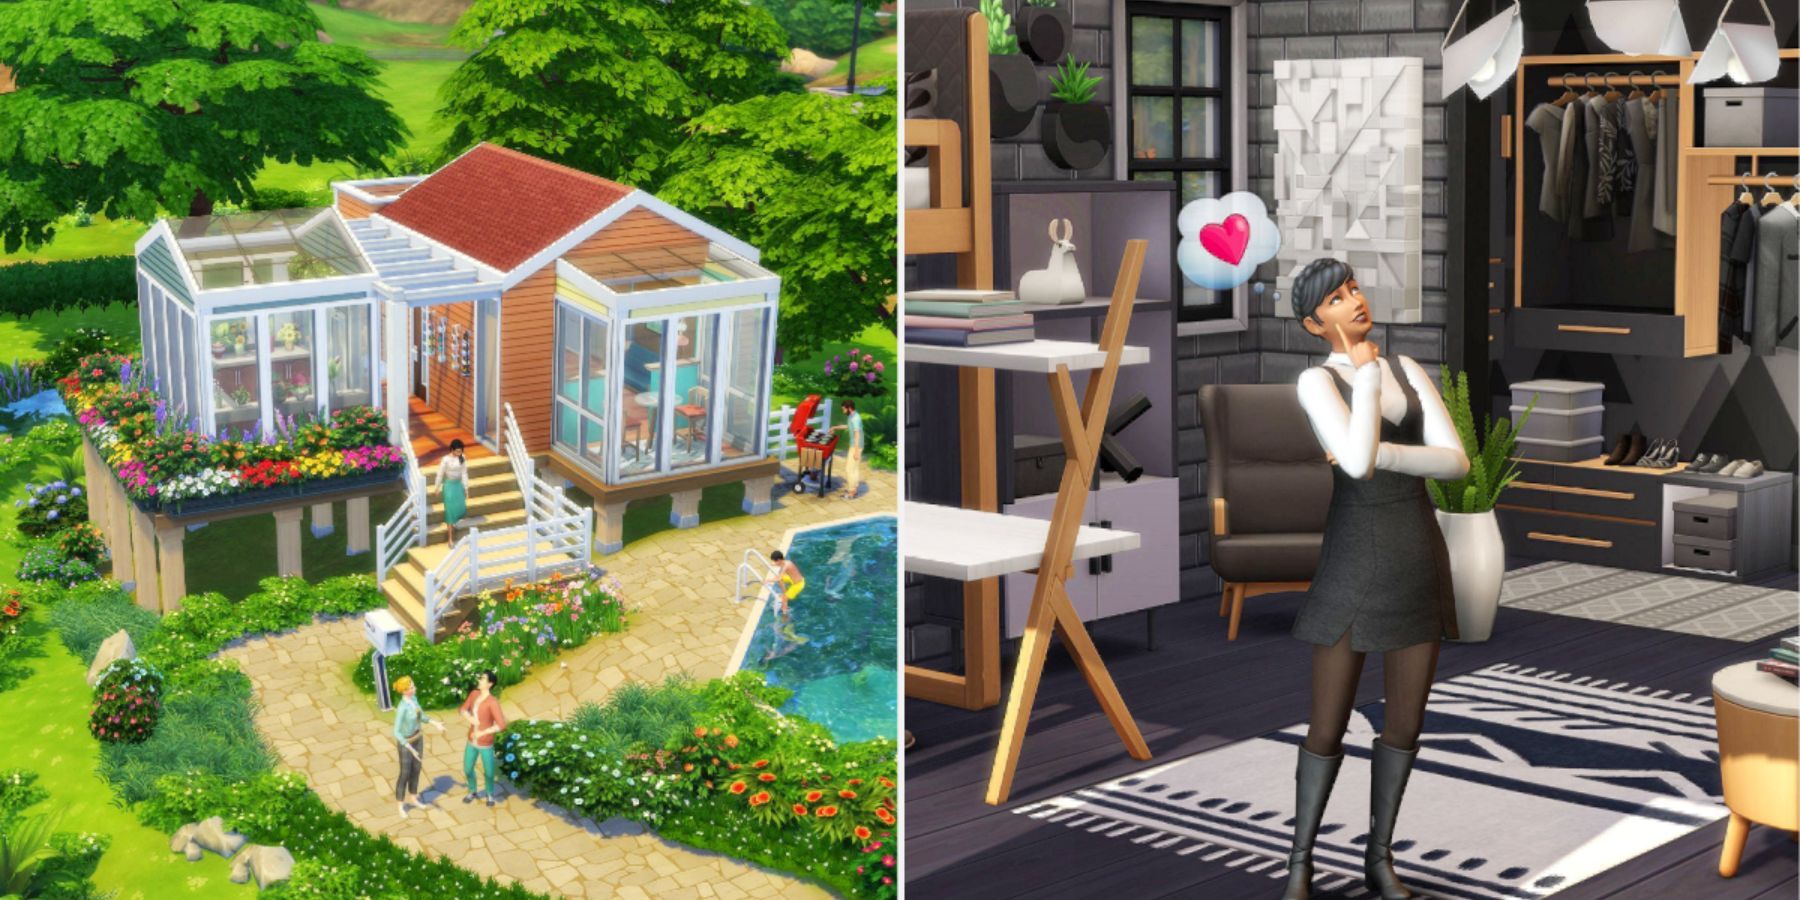 A small green house and a sim in The Sims 4